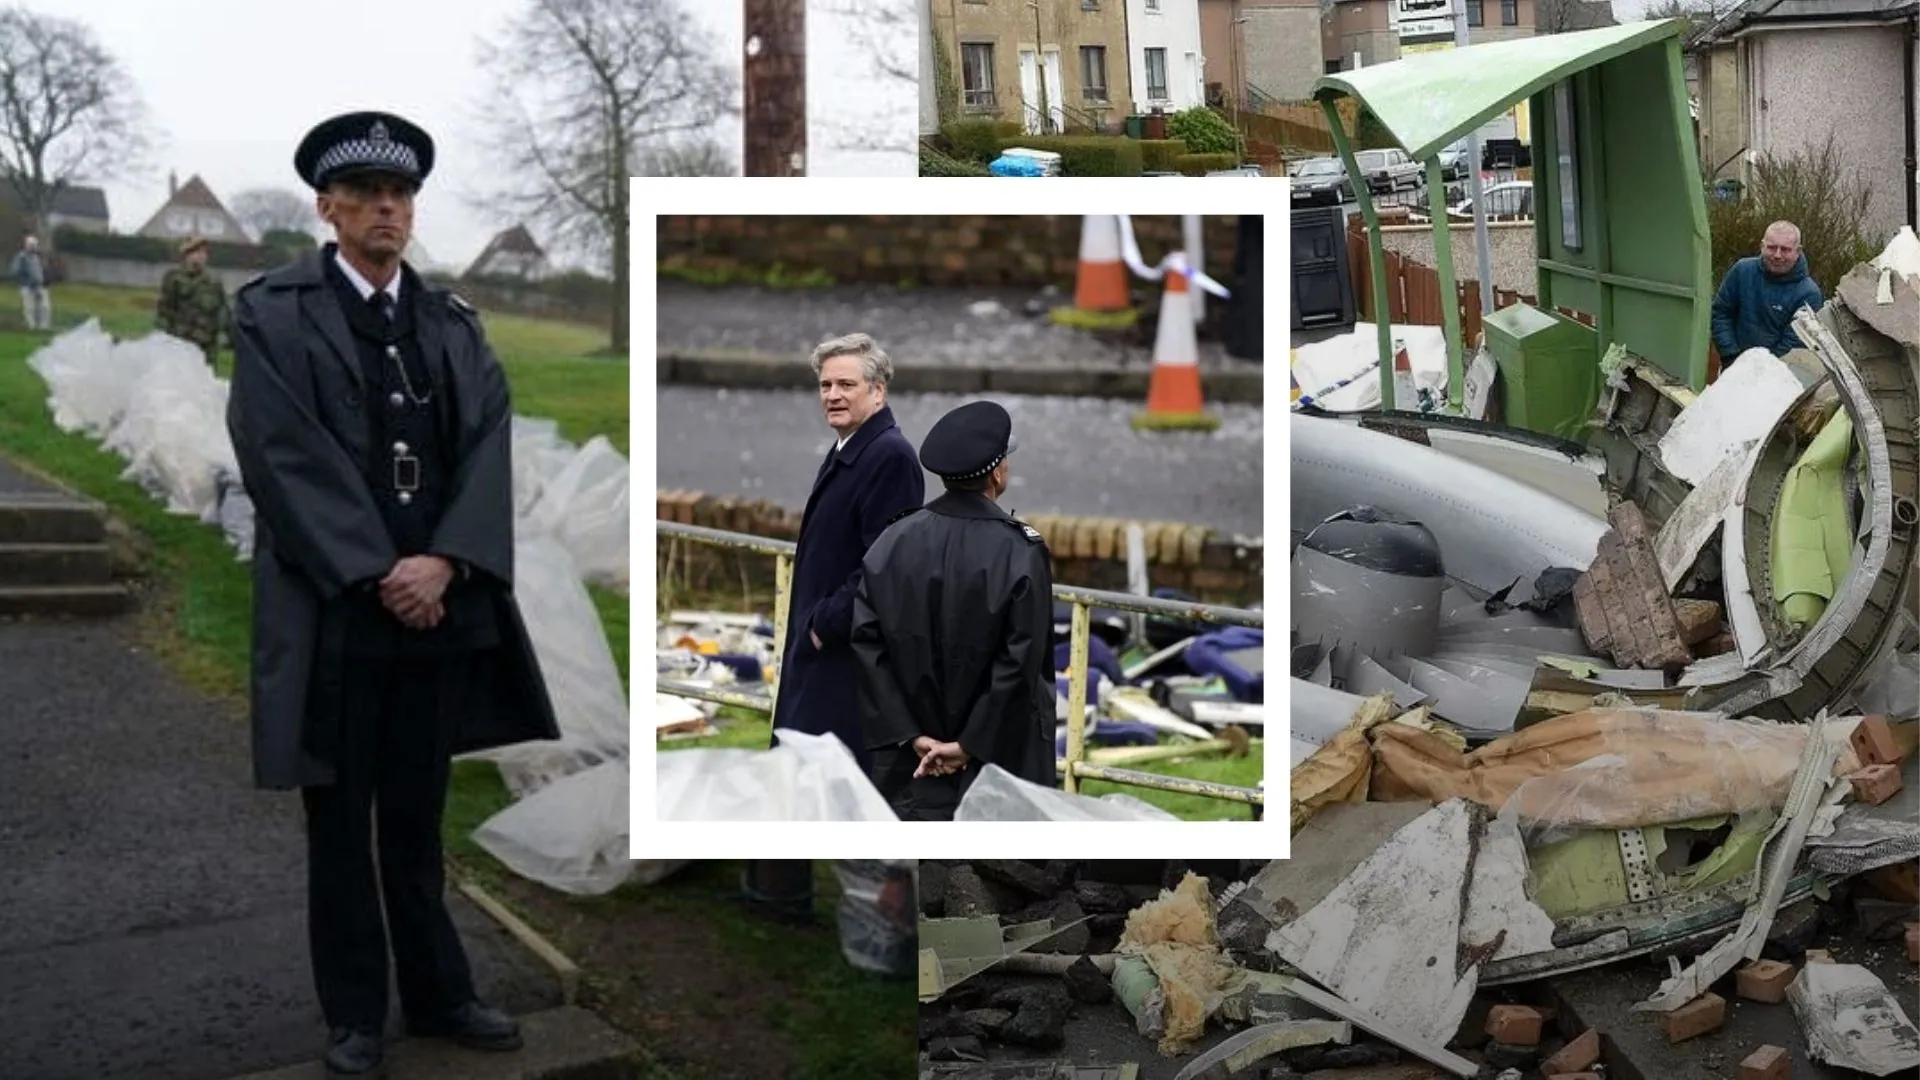 Colin Firth Takes on Role of Grieving Father in Lockerbie Boobing Drama